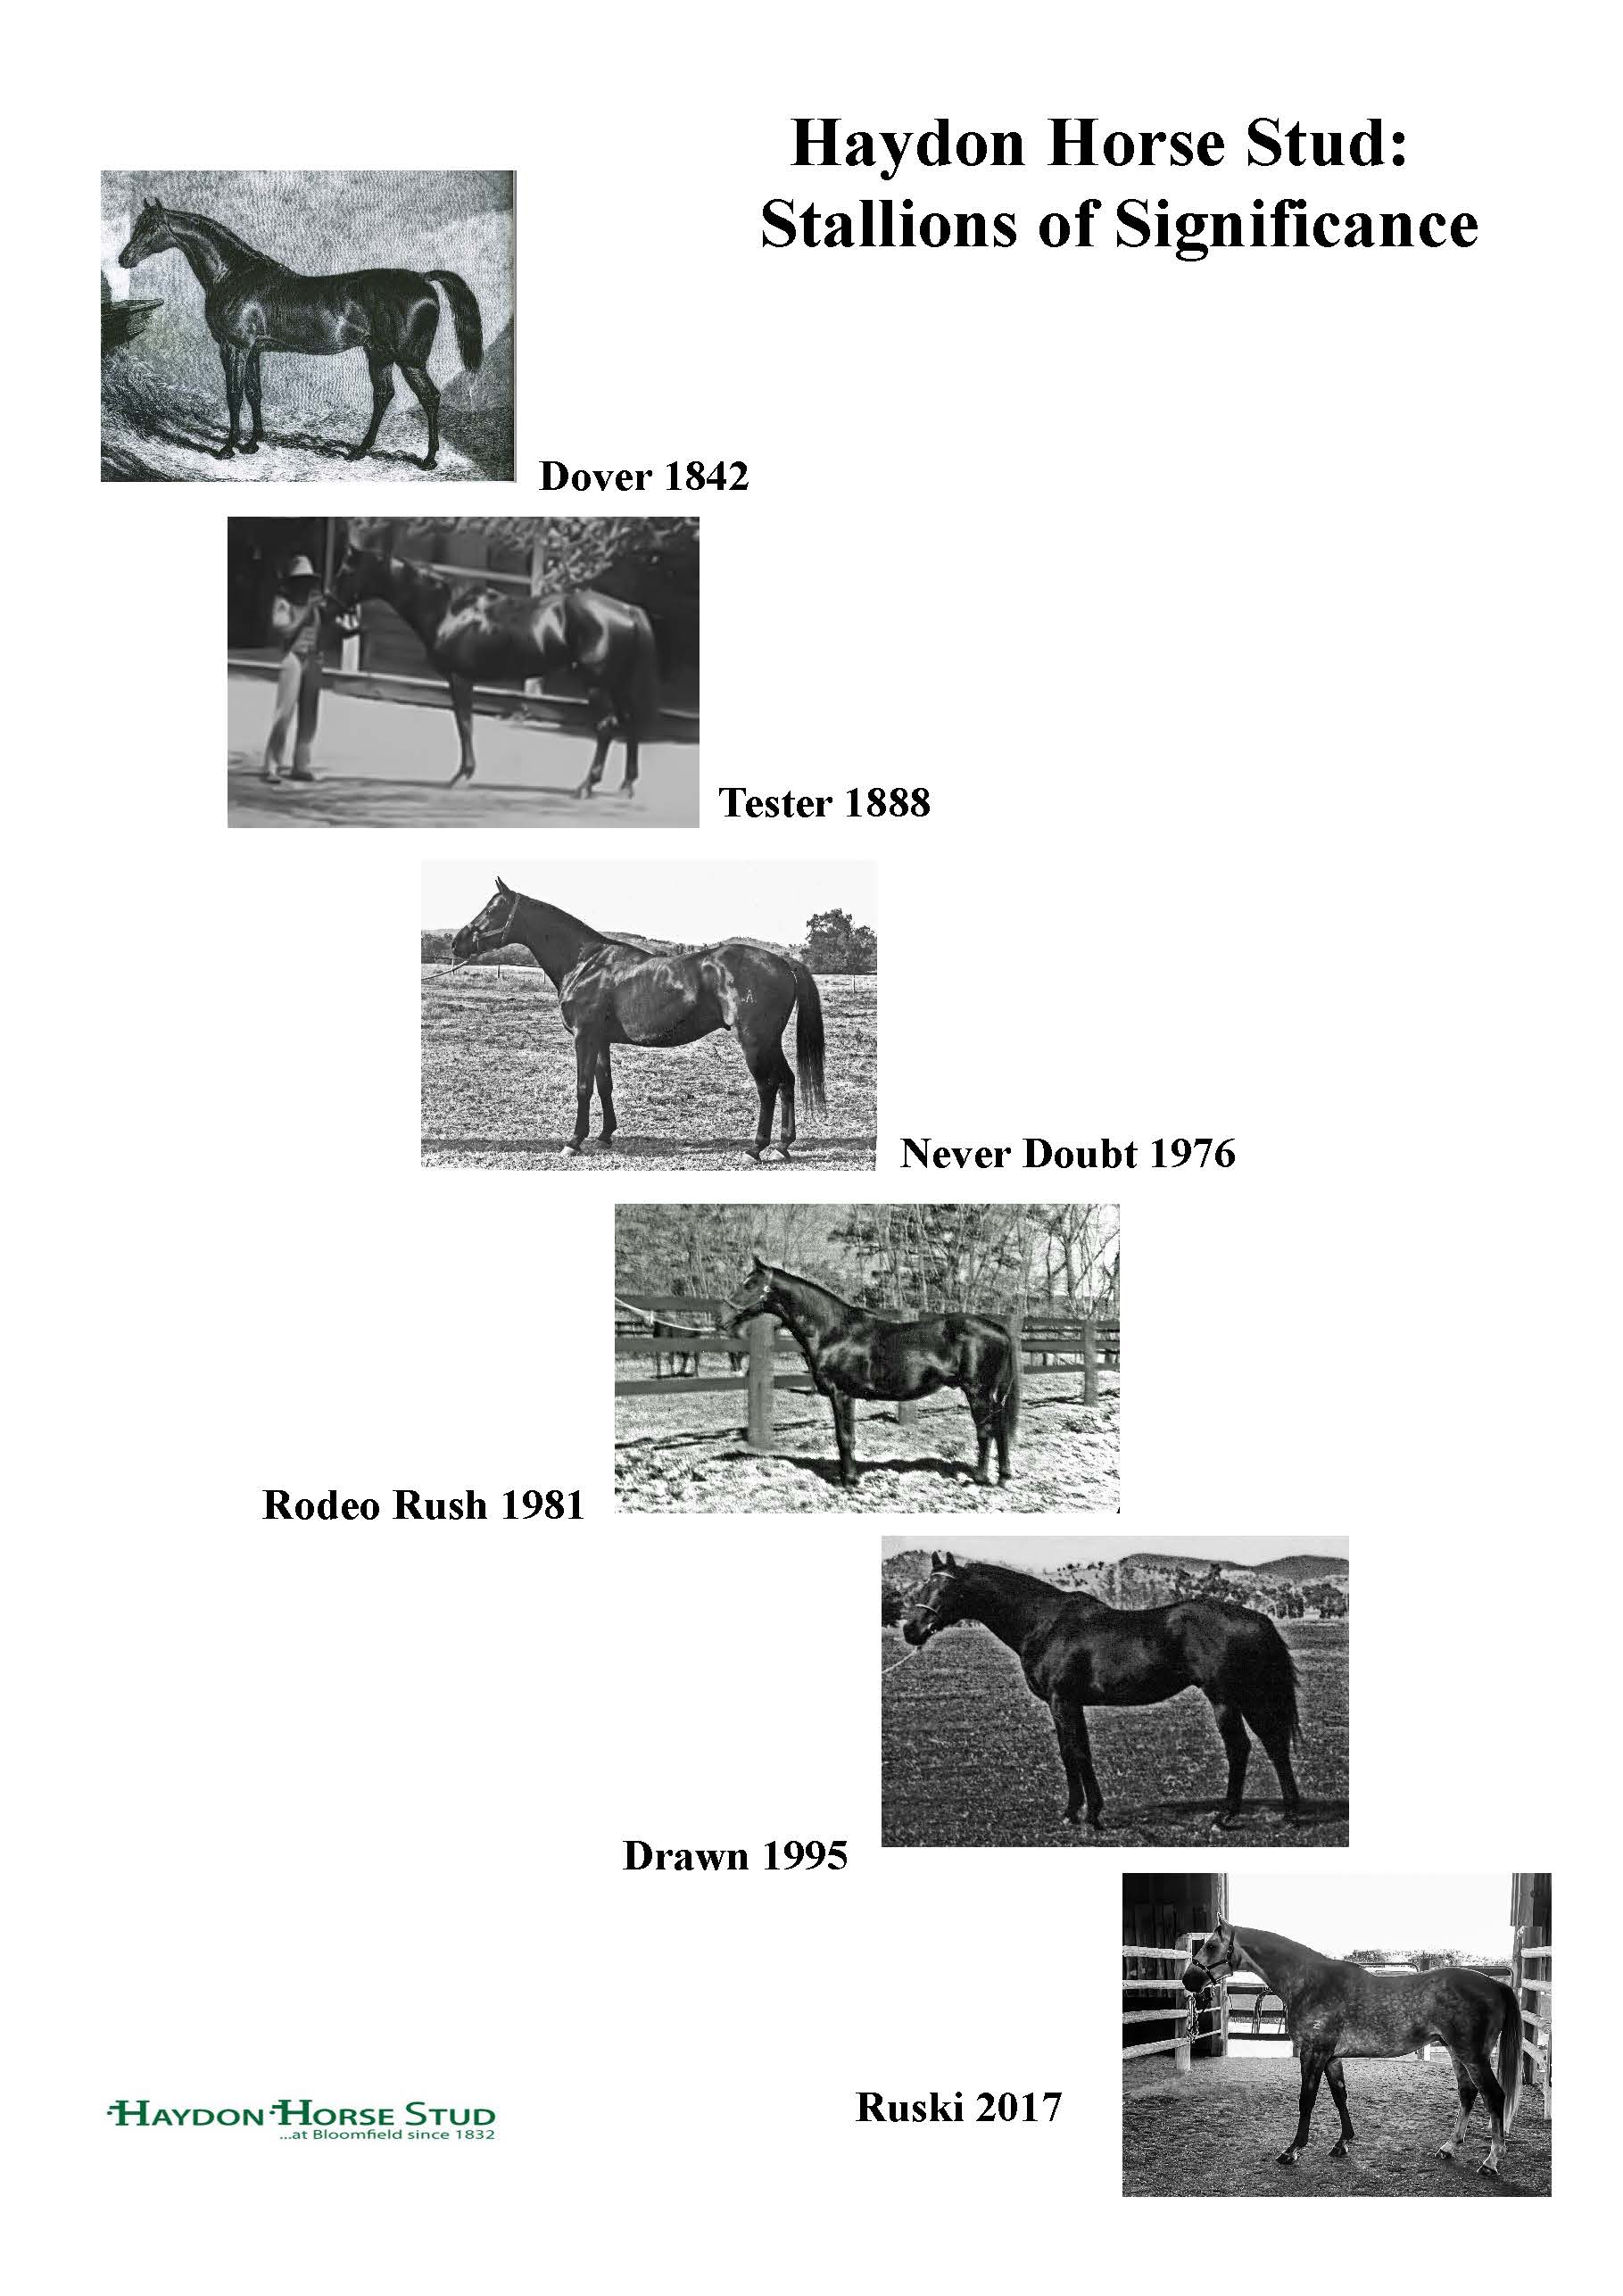 Stallions of Significance timeline photos